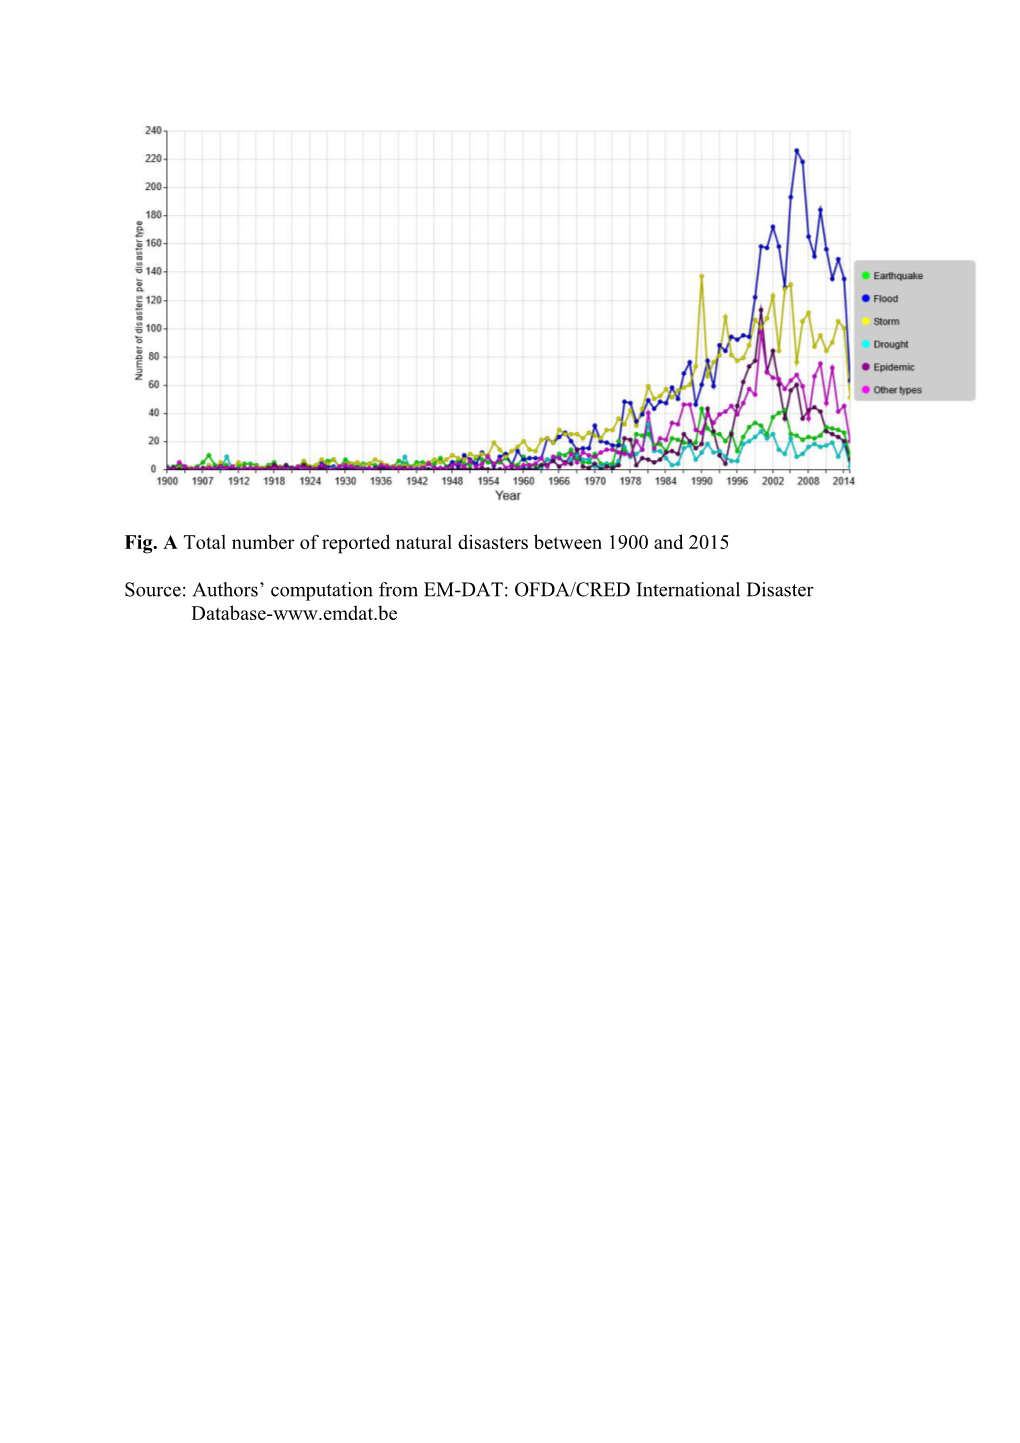 Fig. a Total Number of Reported Natural Disasters Between 1900 and 2015